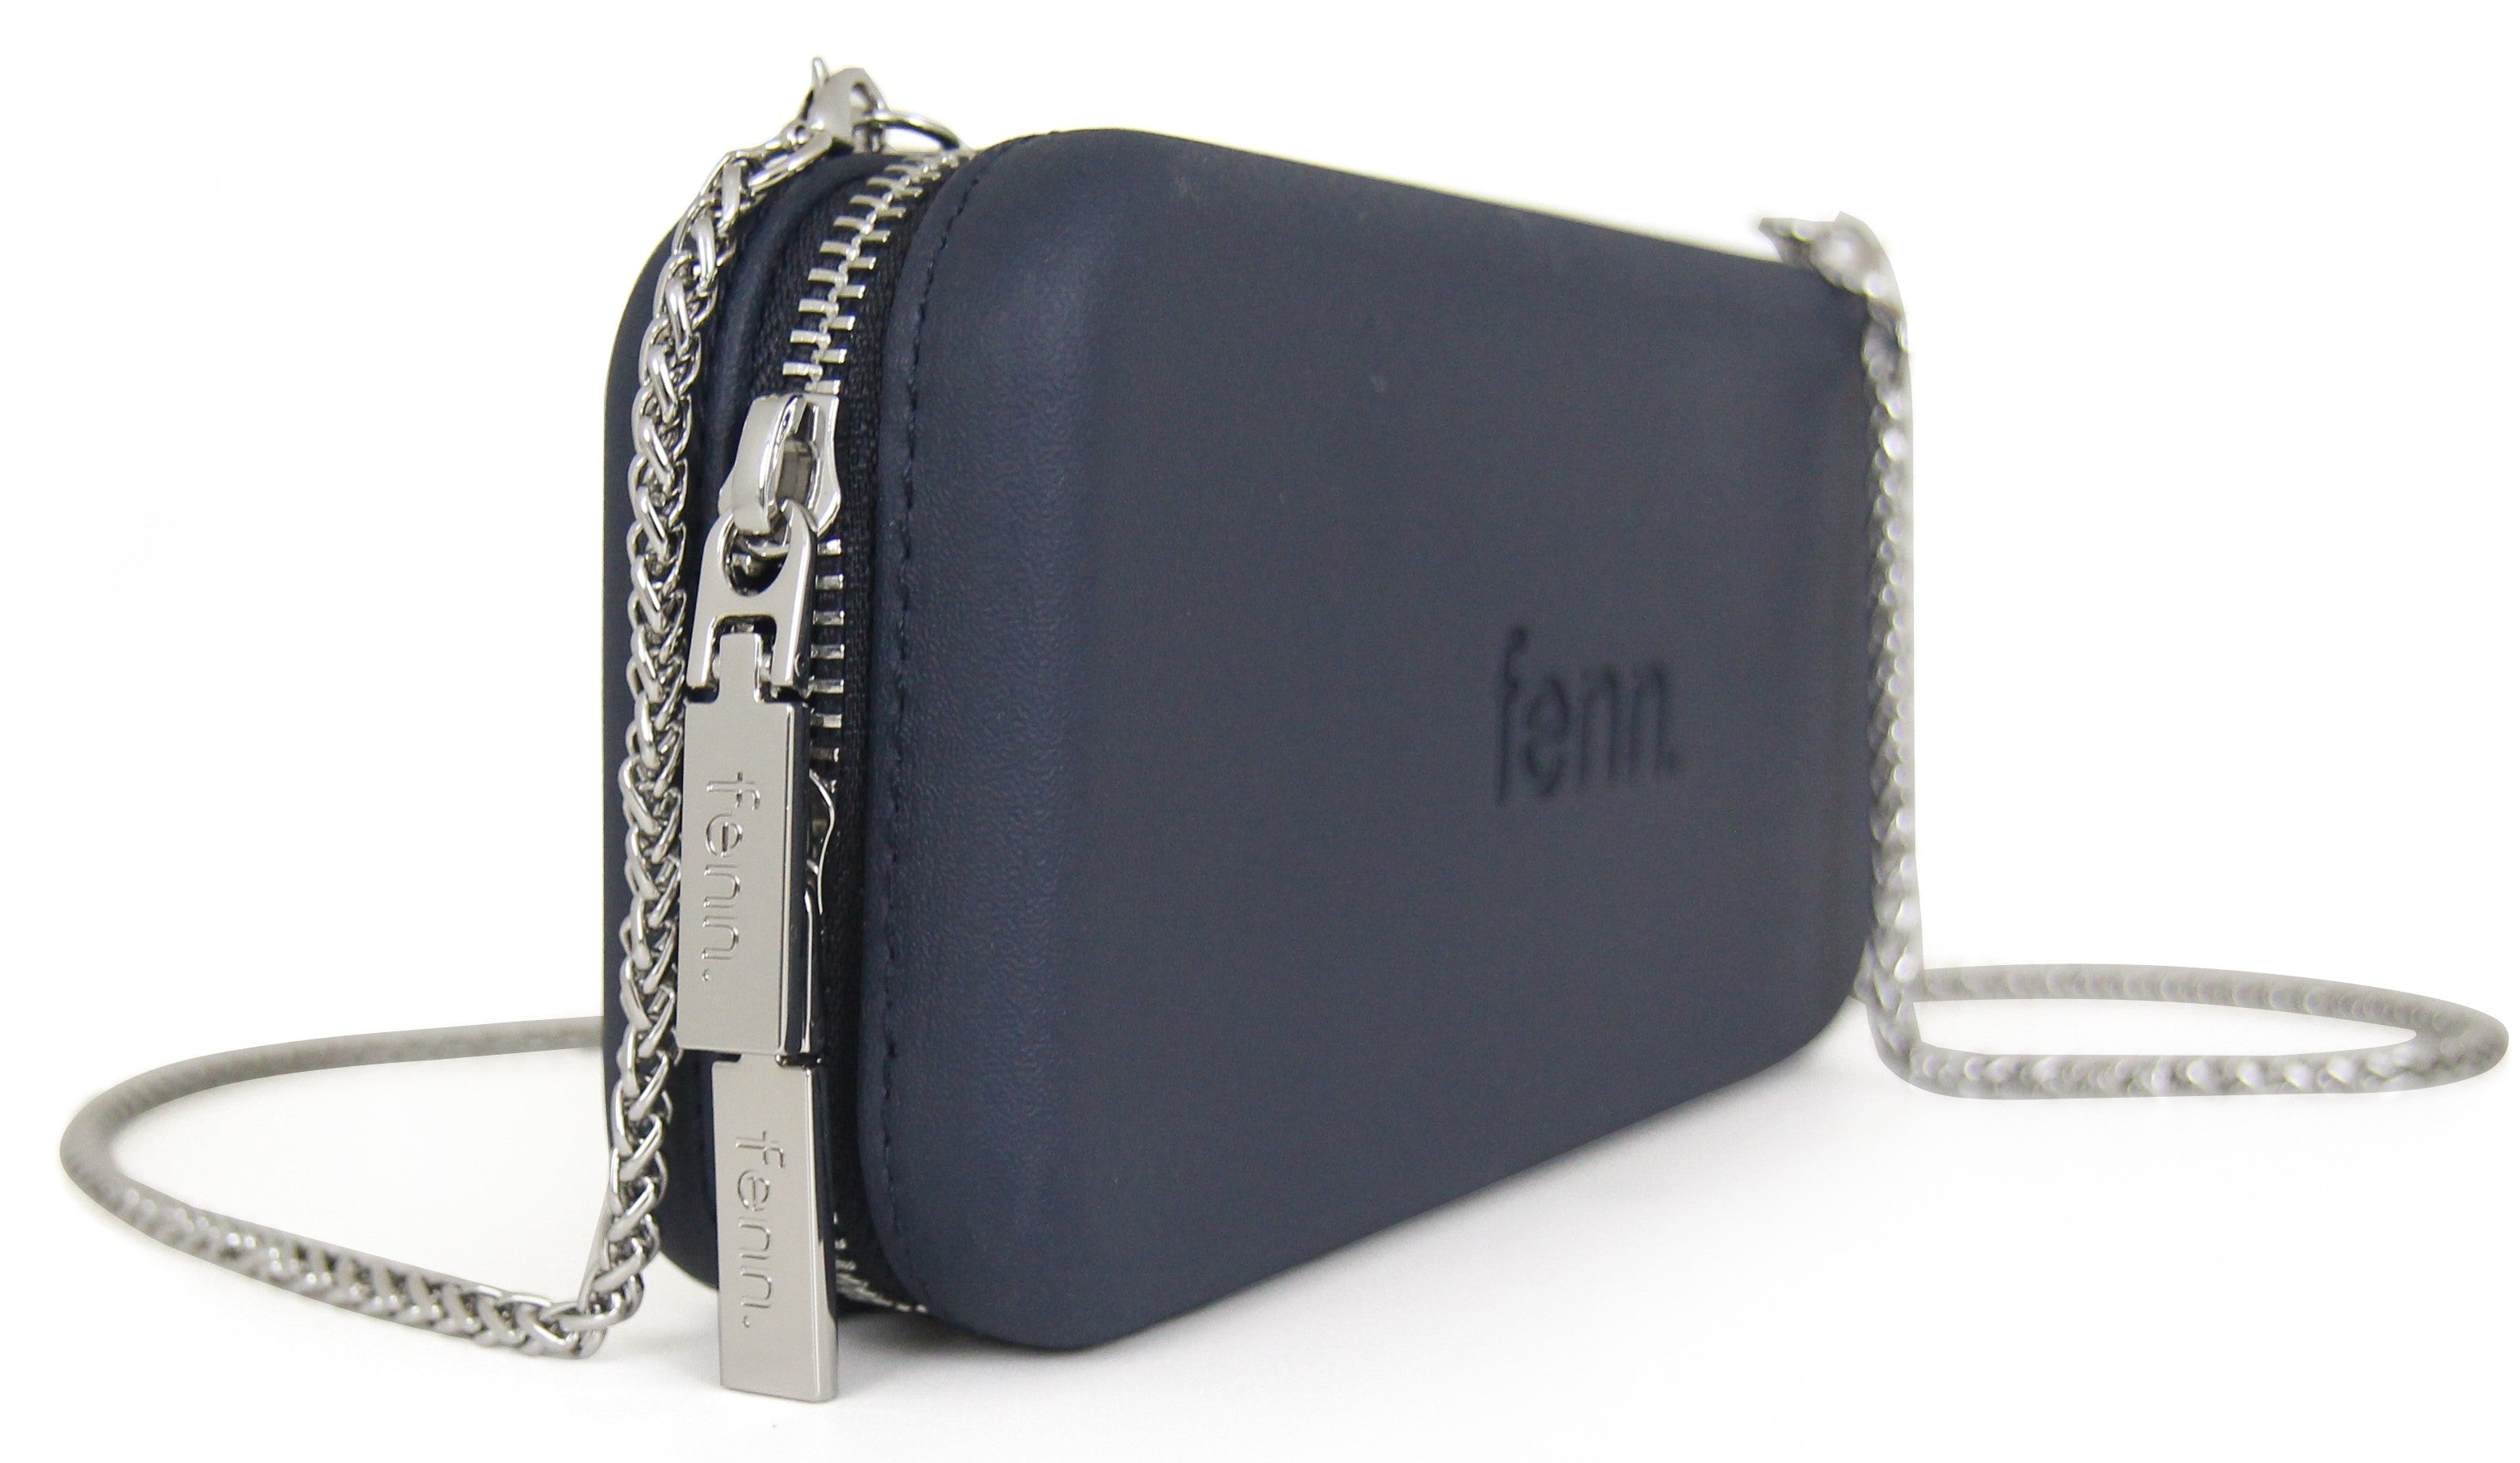 NAVY purse with silver chain strap